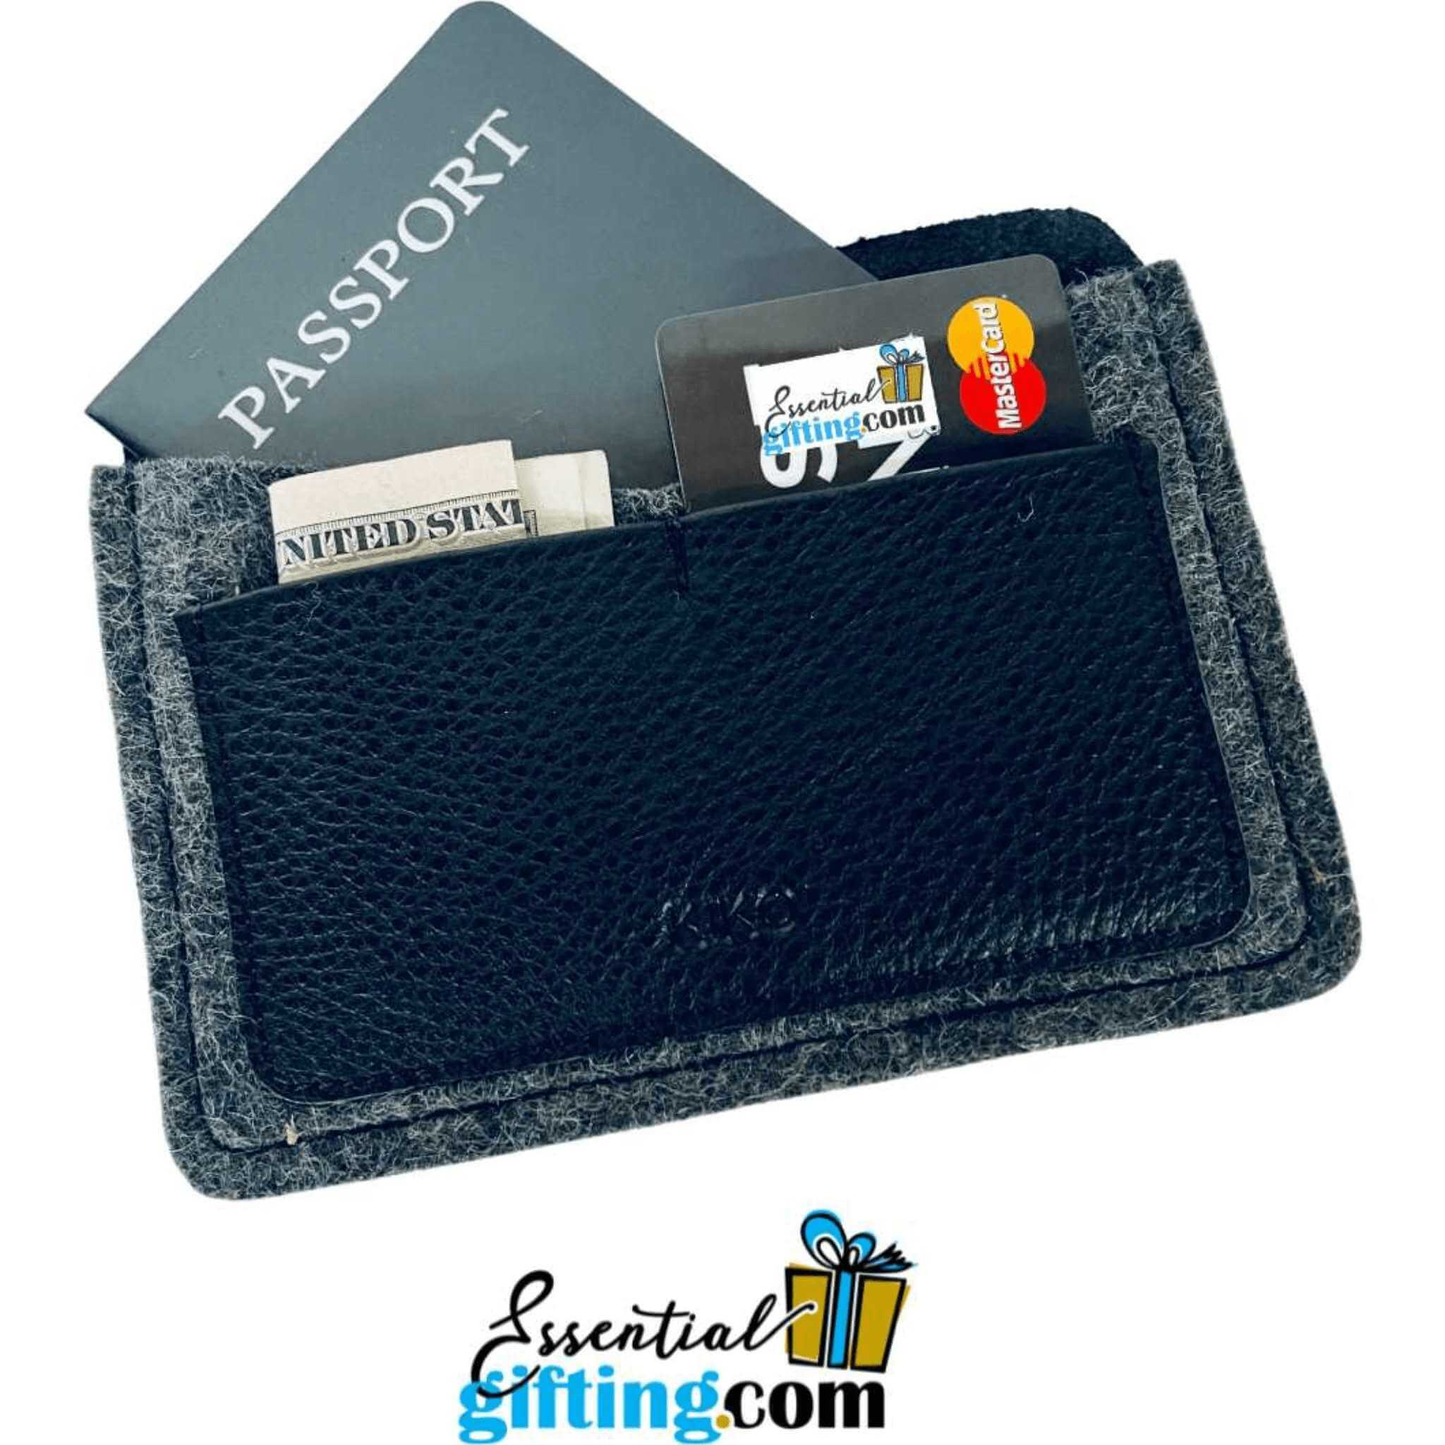 https://essentialgifting.com/products/travel-passport-holder-for-guys